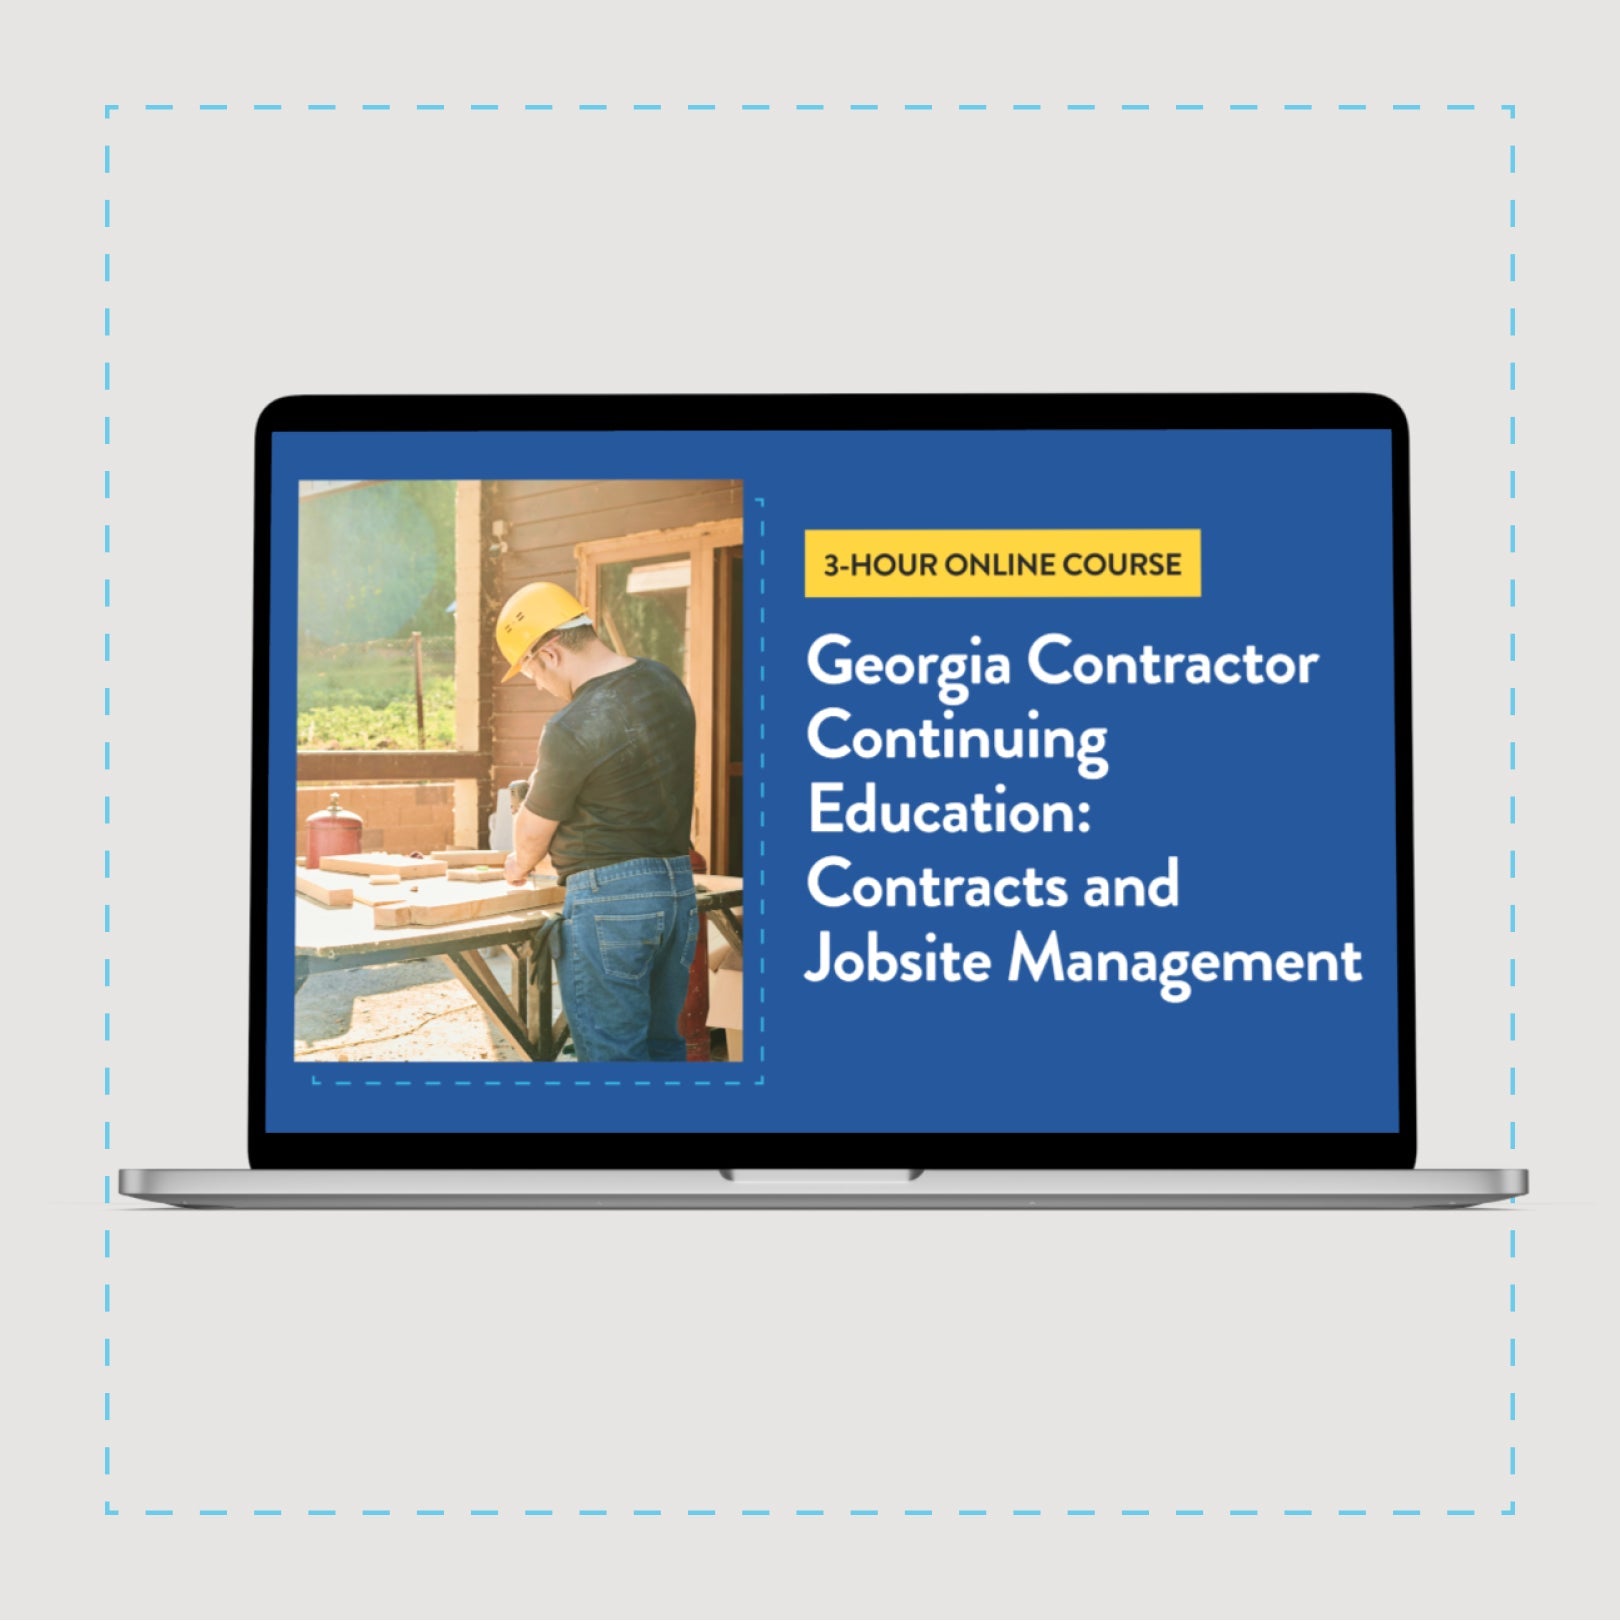 Georgia Contractor Continuing Education: Contracts and Jobsite Management - 3-Hour Live Webinar